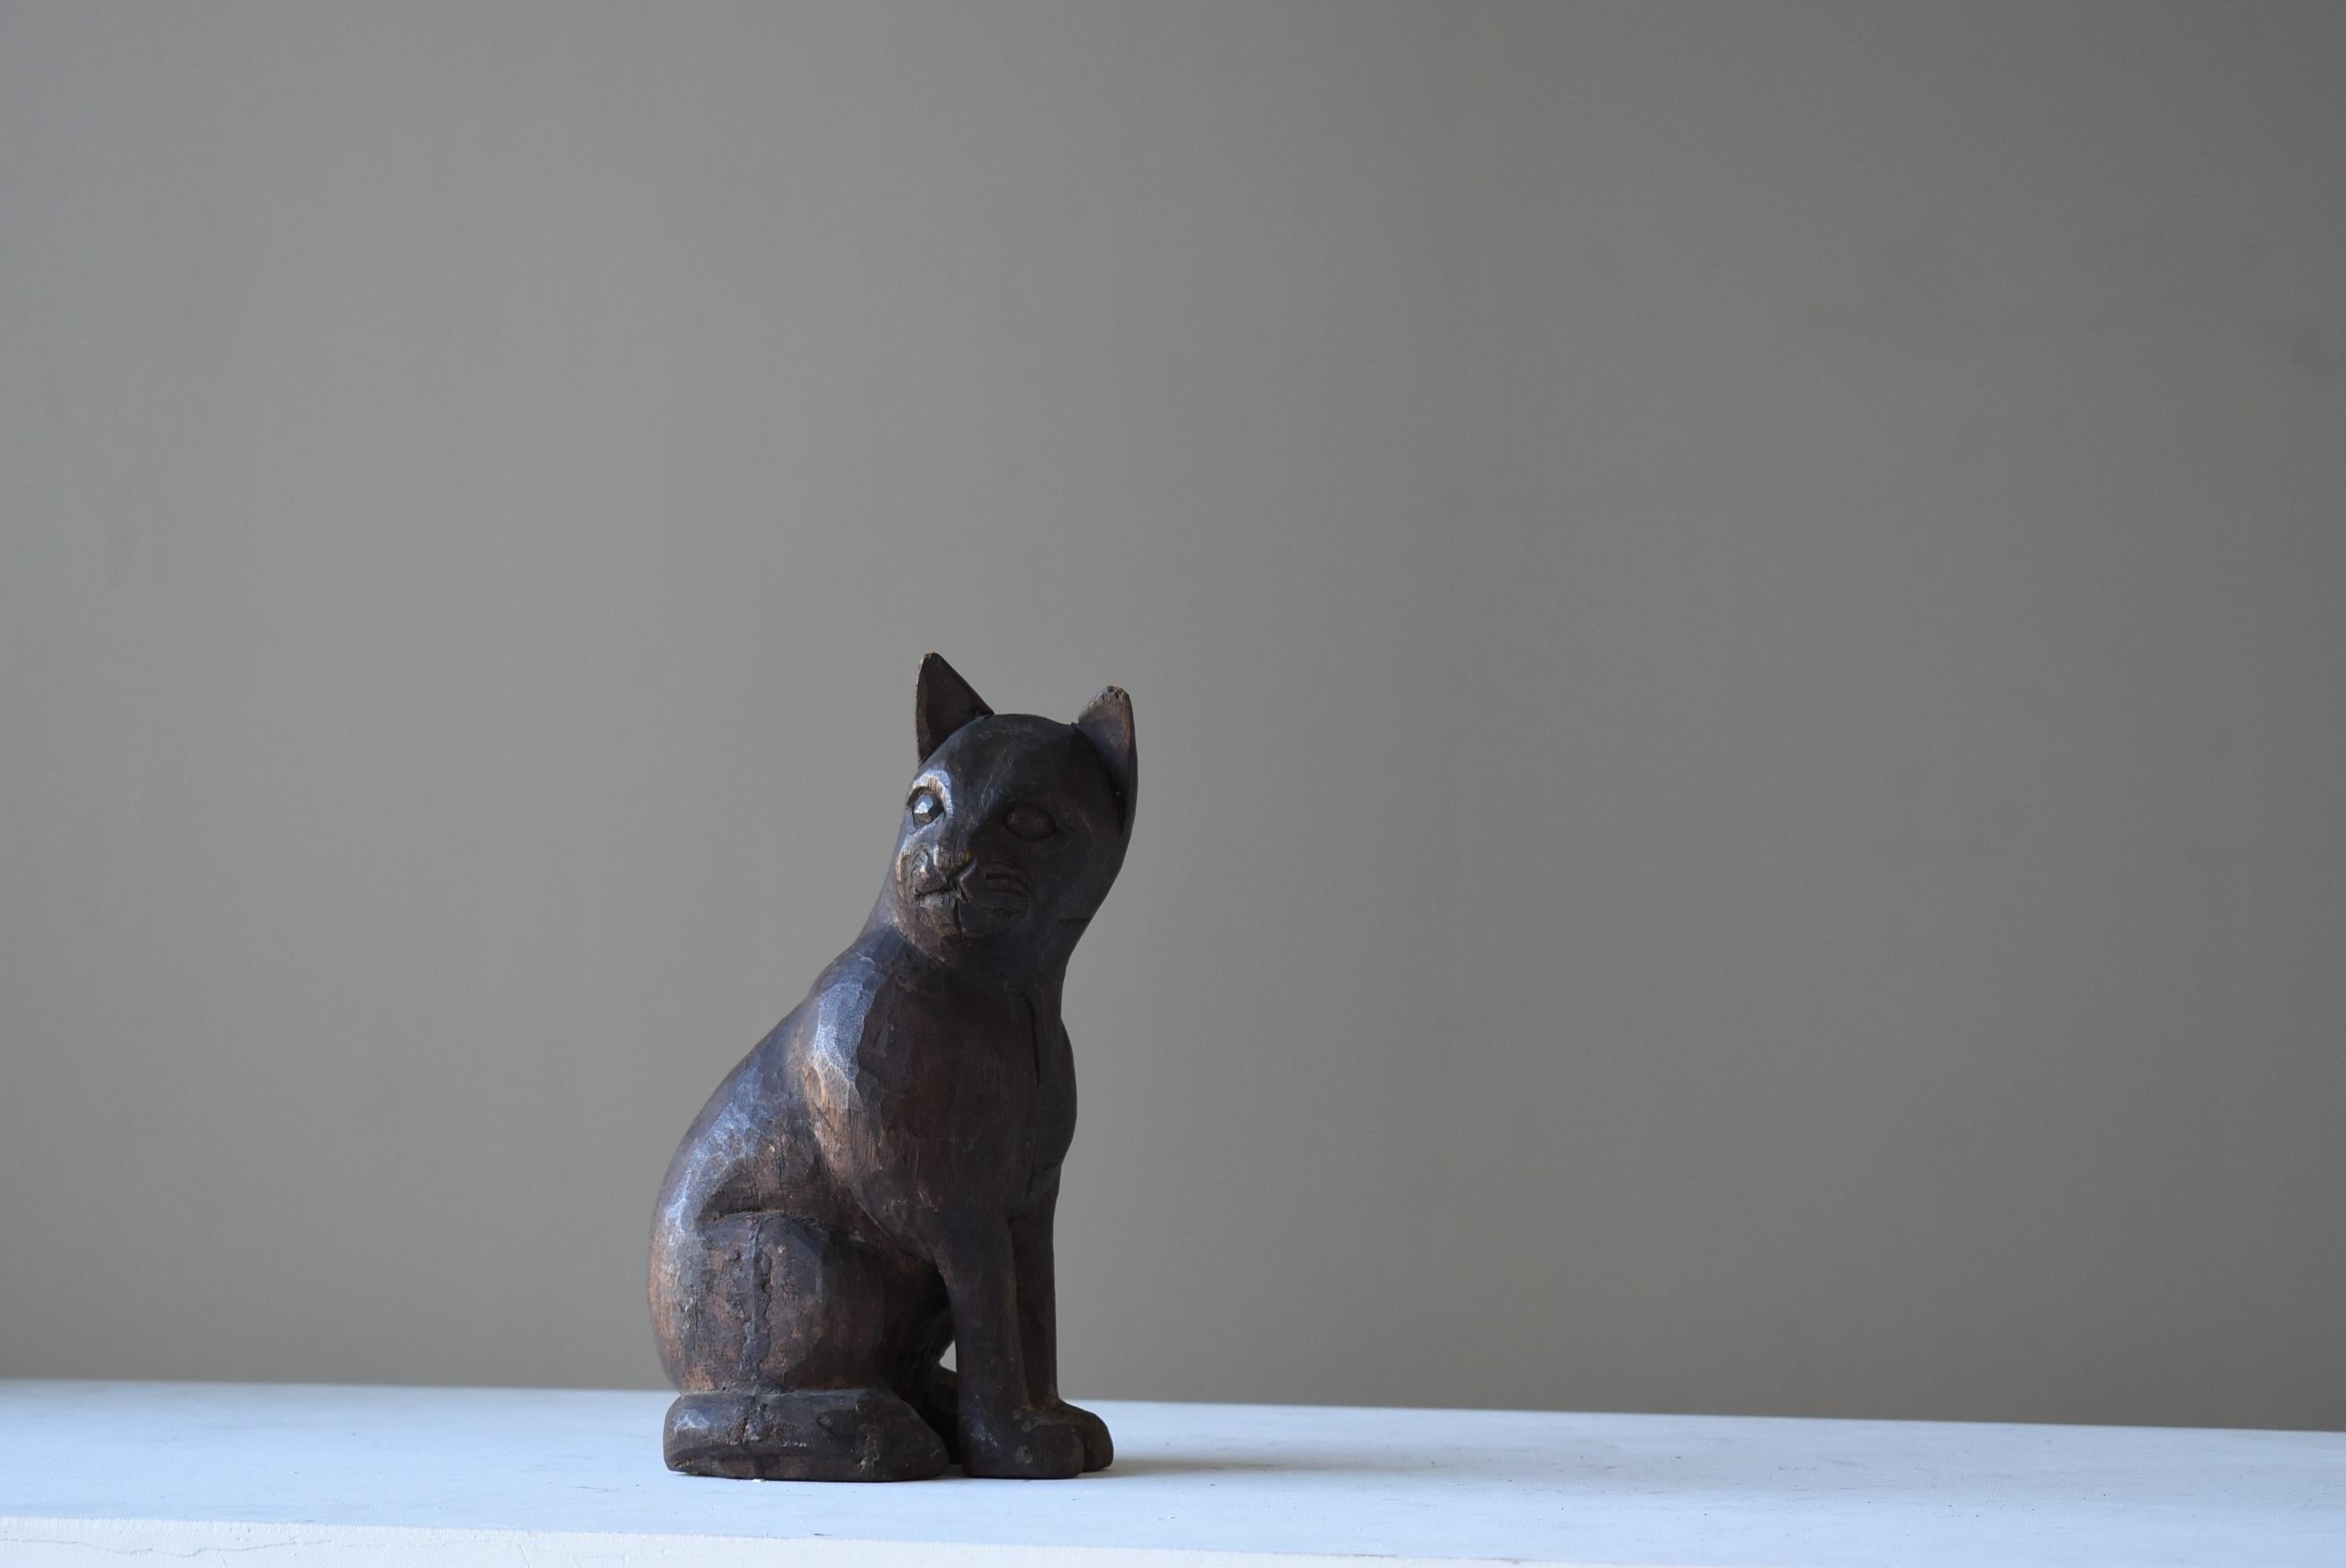 Japanese Antique Wood Carving Cat 1860s-1920s /Figurine Animal Sculpture Object 7